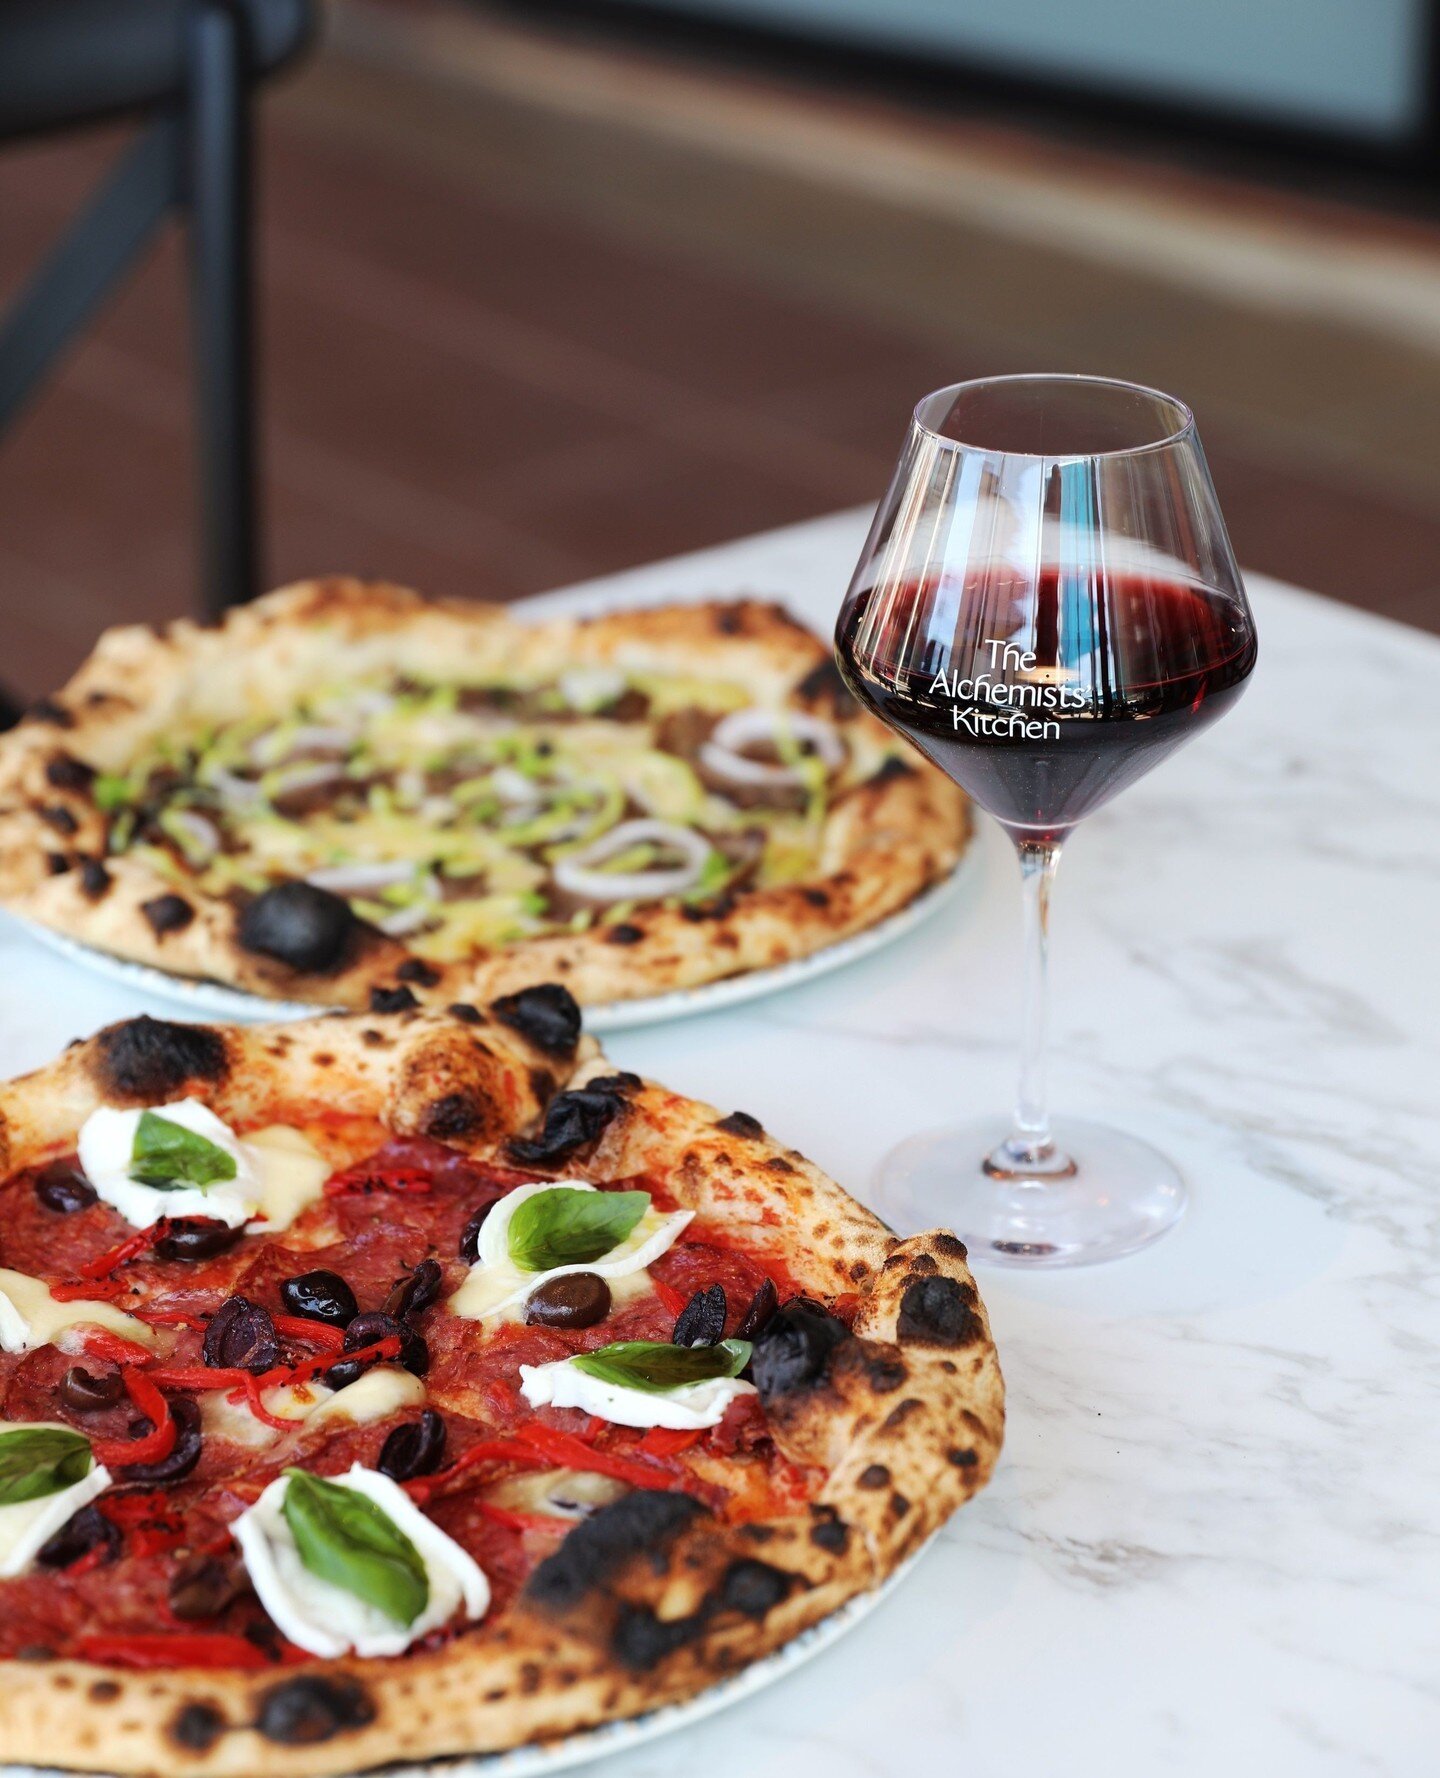 A mid-week restaurant meal never goes astray - especially when it involves wood fired pizza and a nice drop of red. 🍷⁠
⁠
Dine in with us or order online if you'd prefer, Wednesday through Sunday. ⁠
⁠
#AlchemistsKitchen